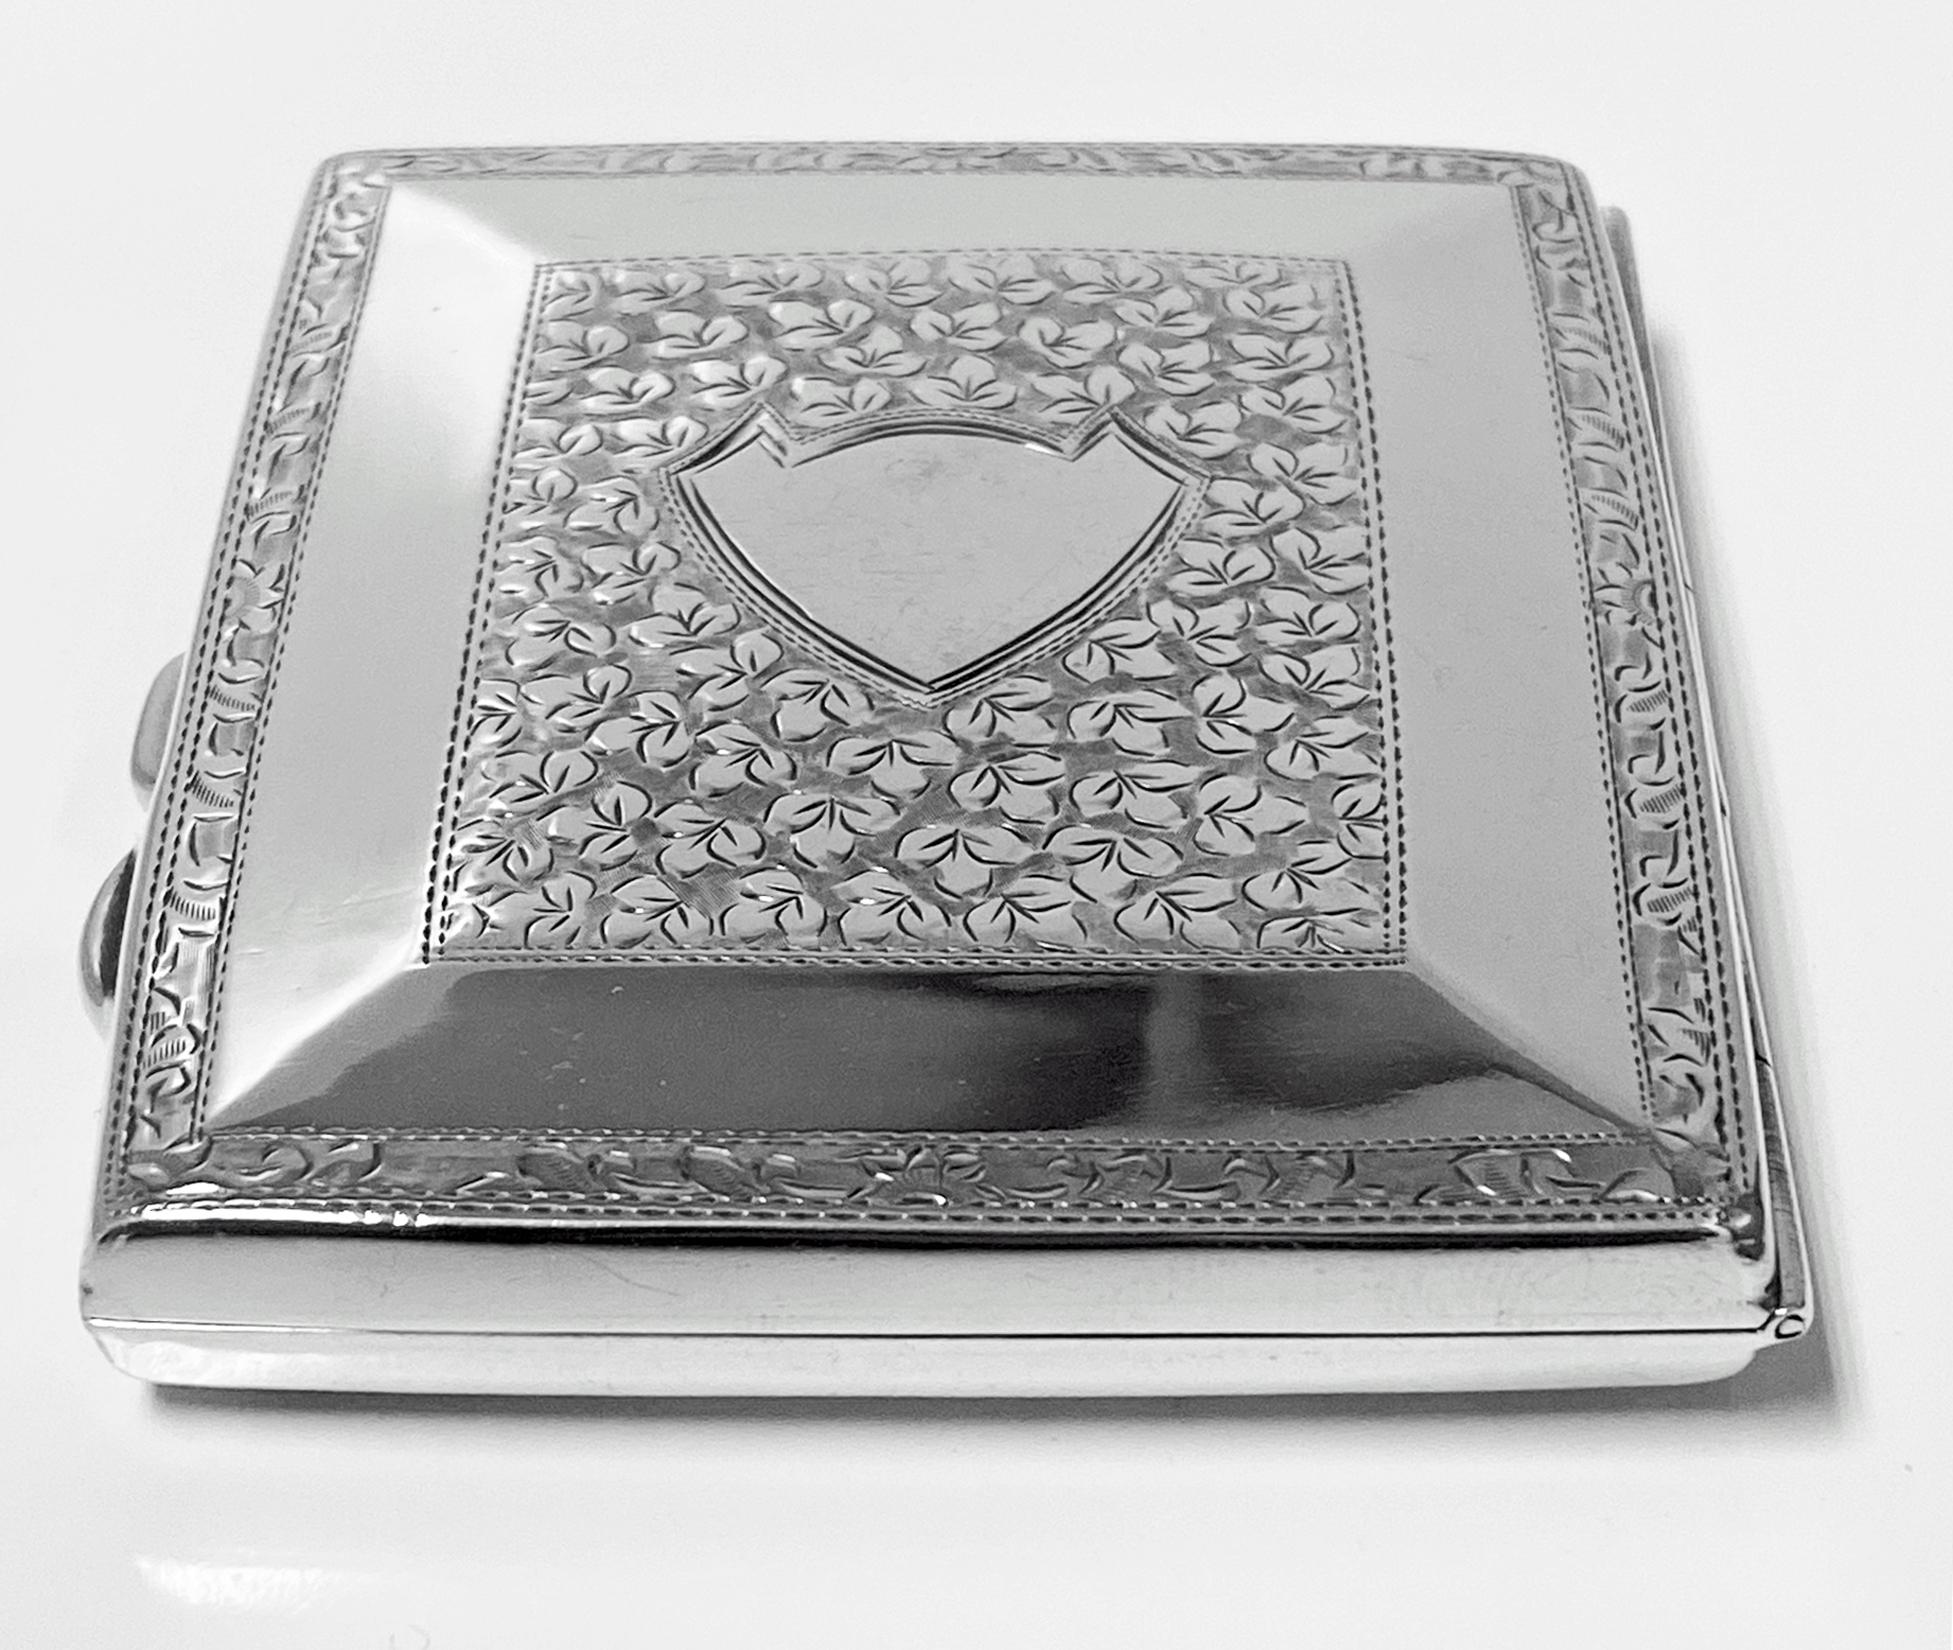 how much is a silver cigarette case worth